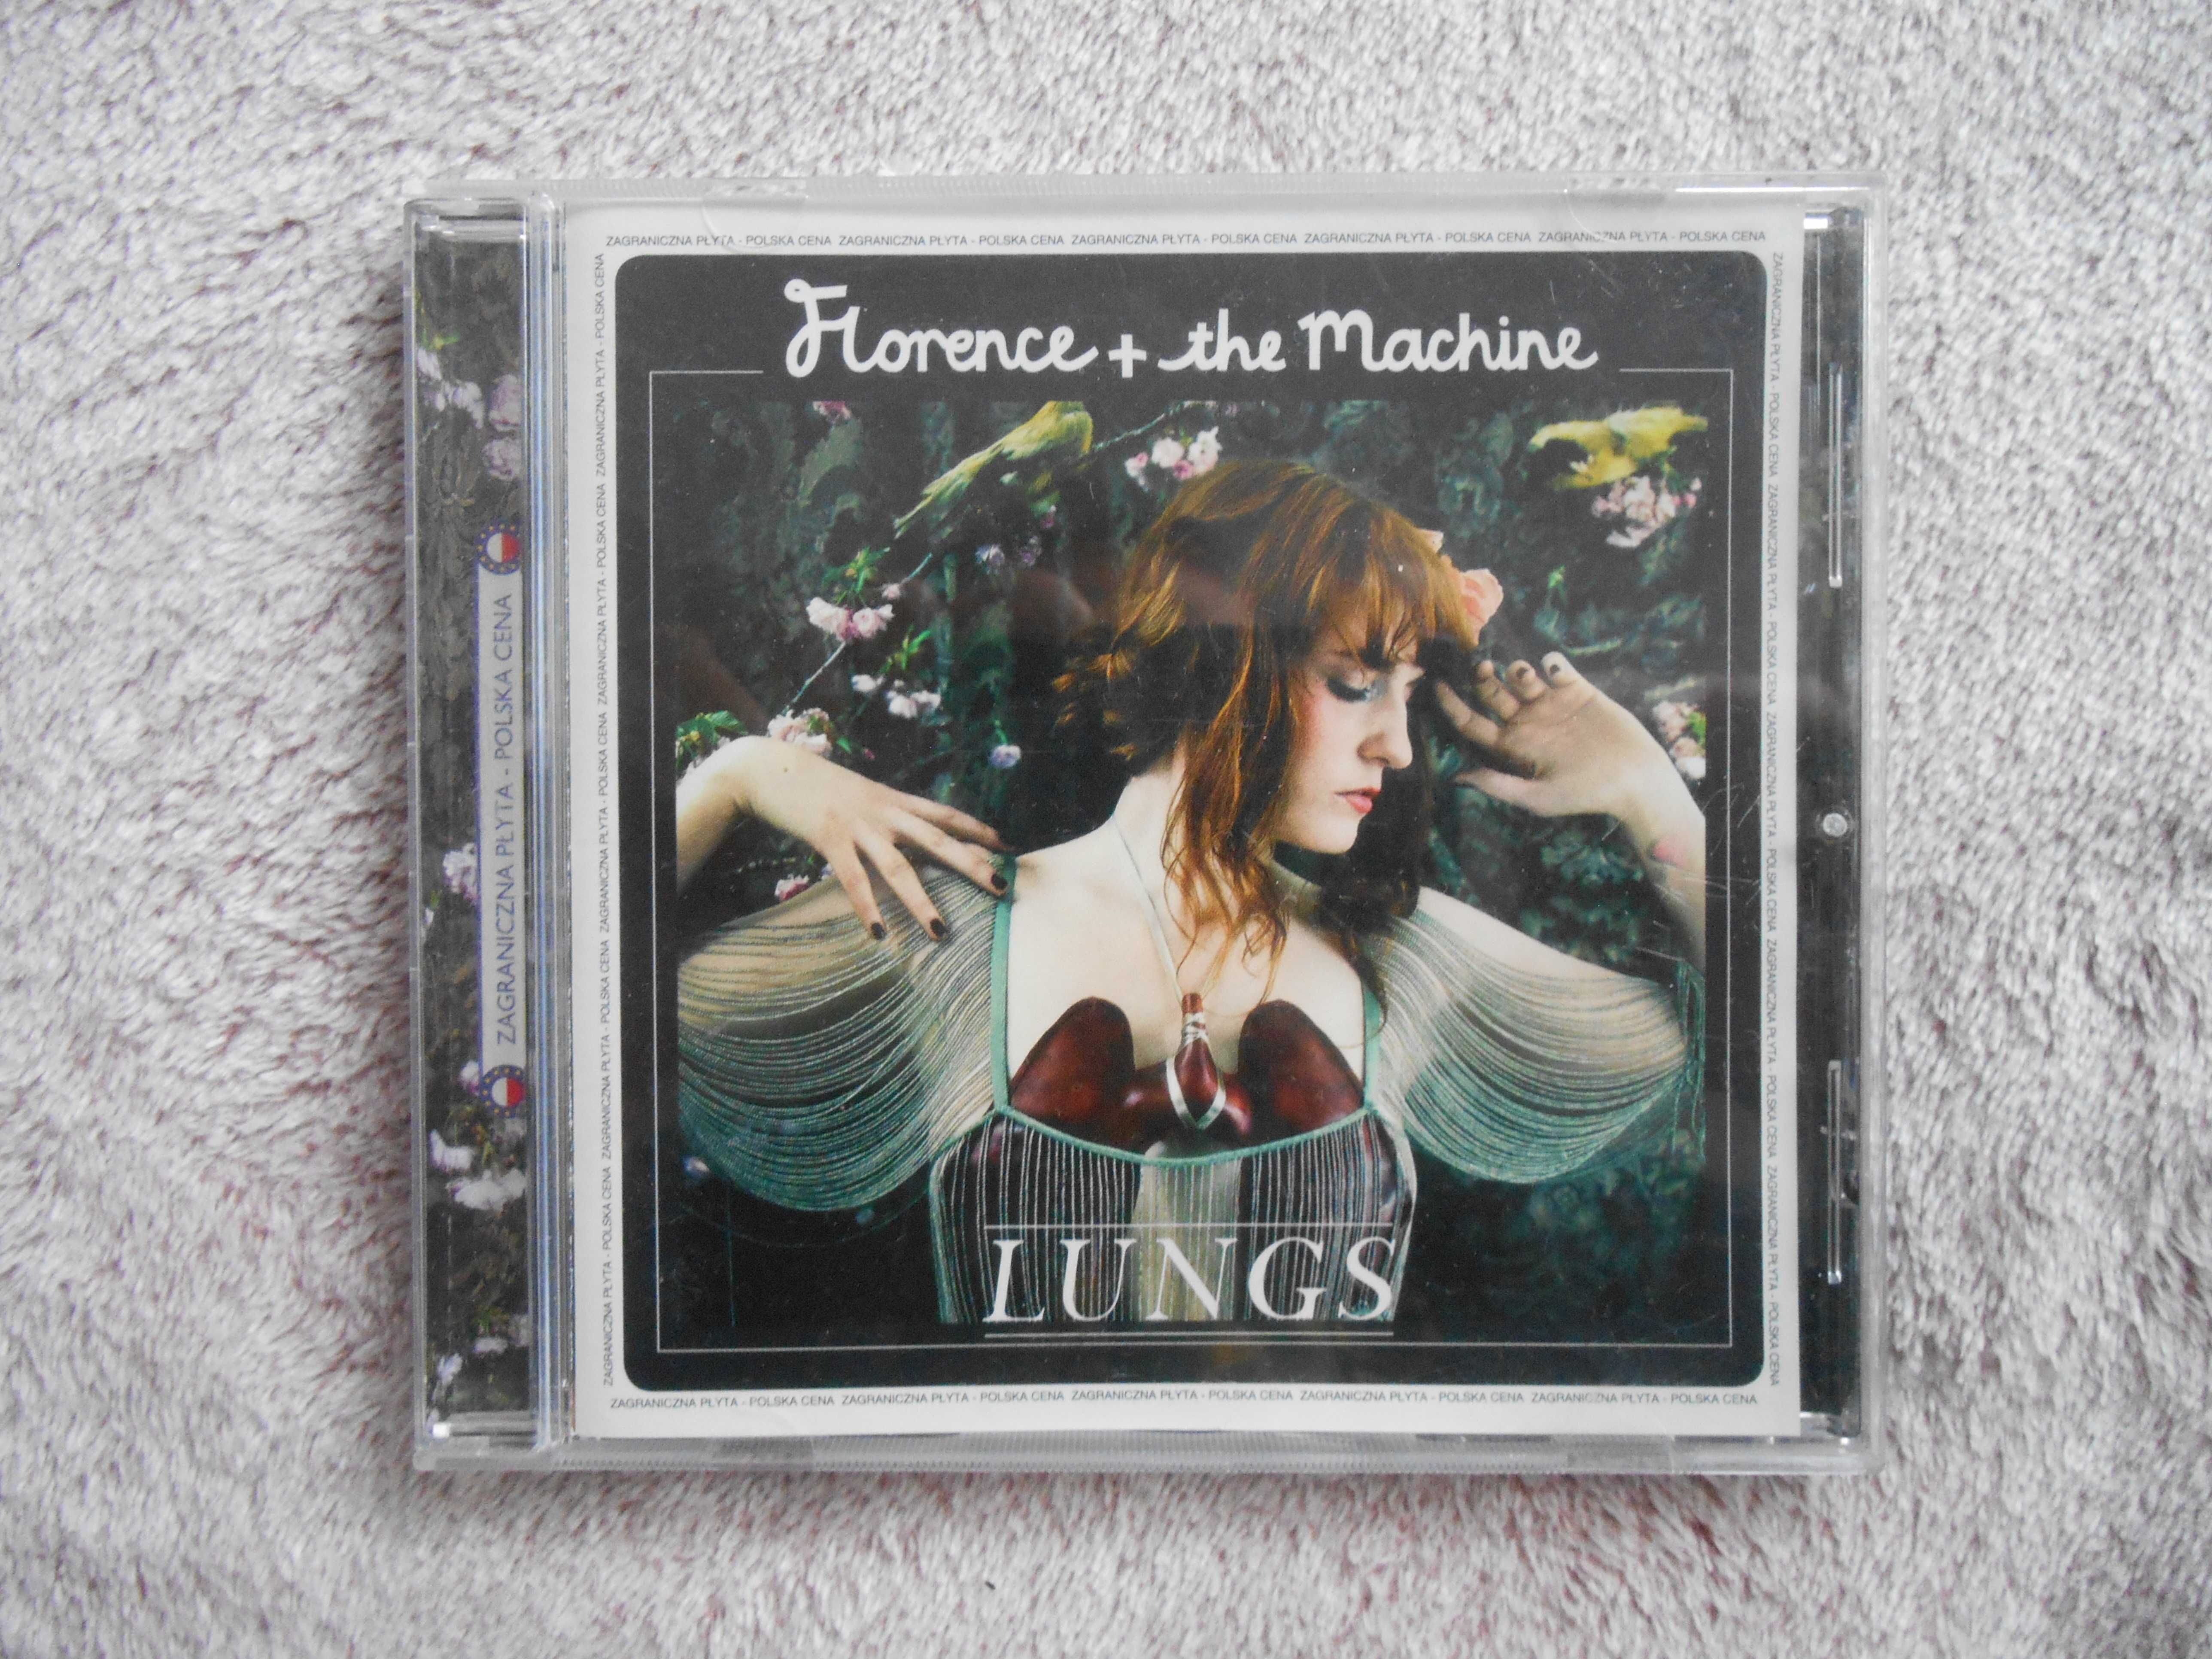 Florence and The Machine - Lungs CD